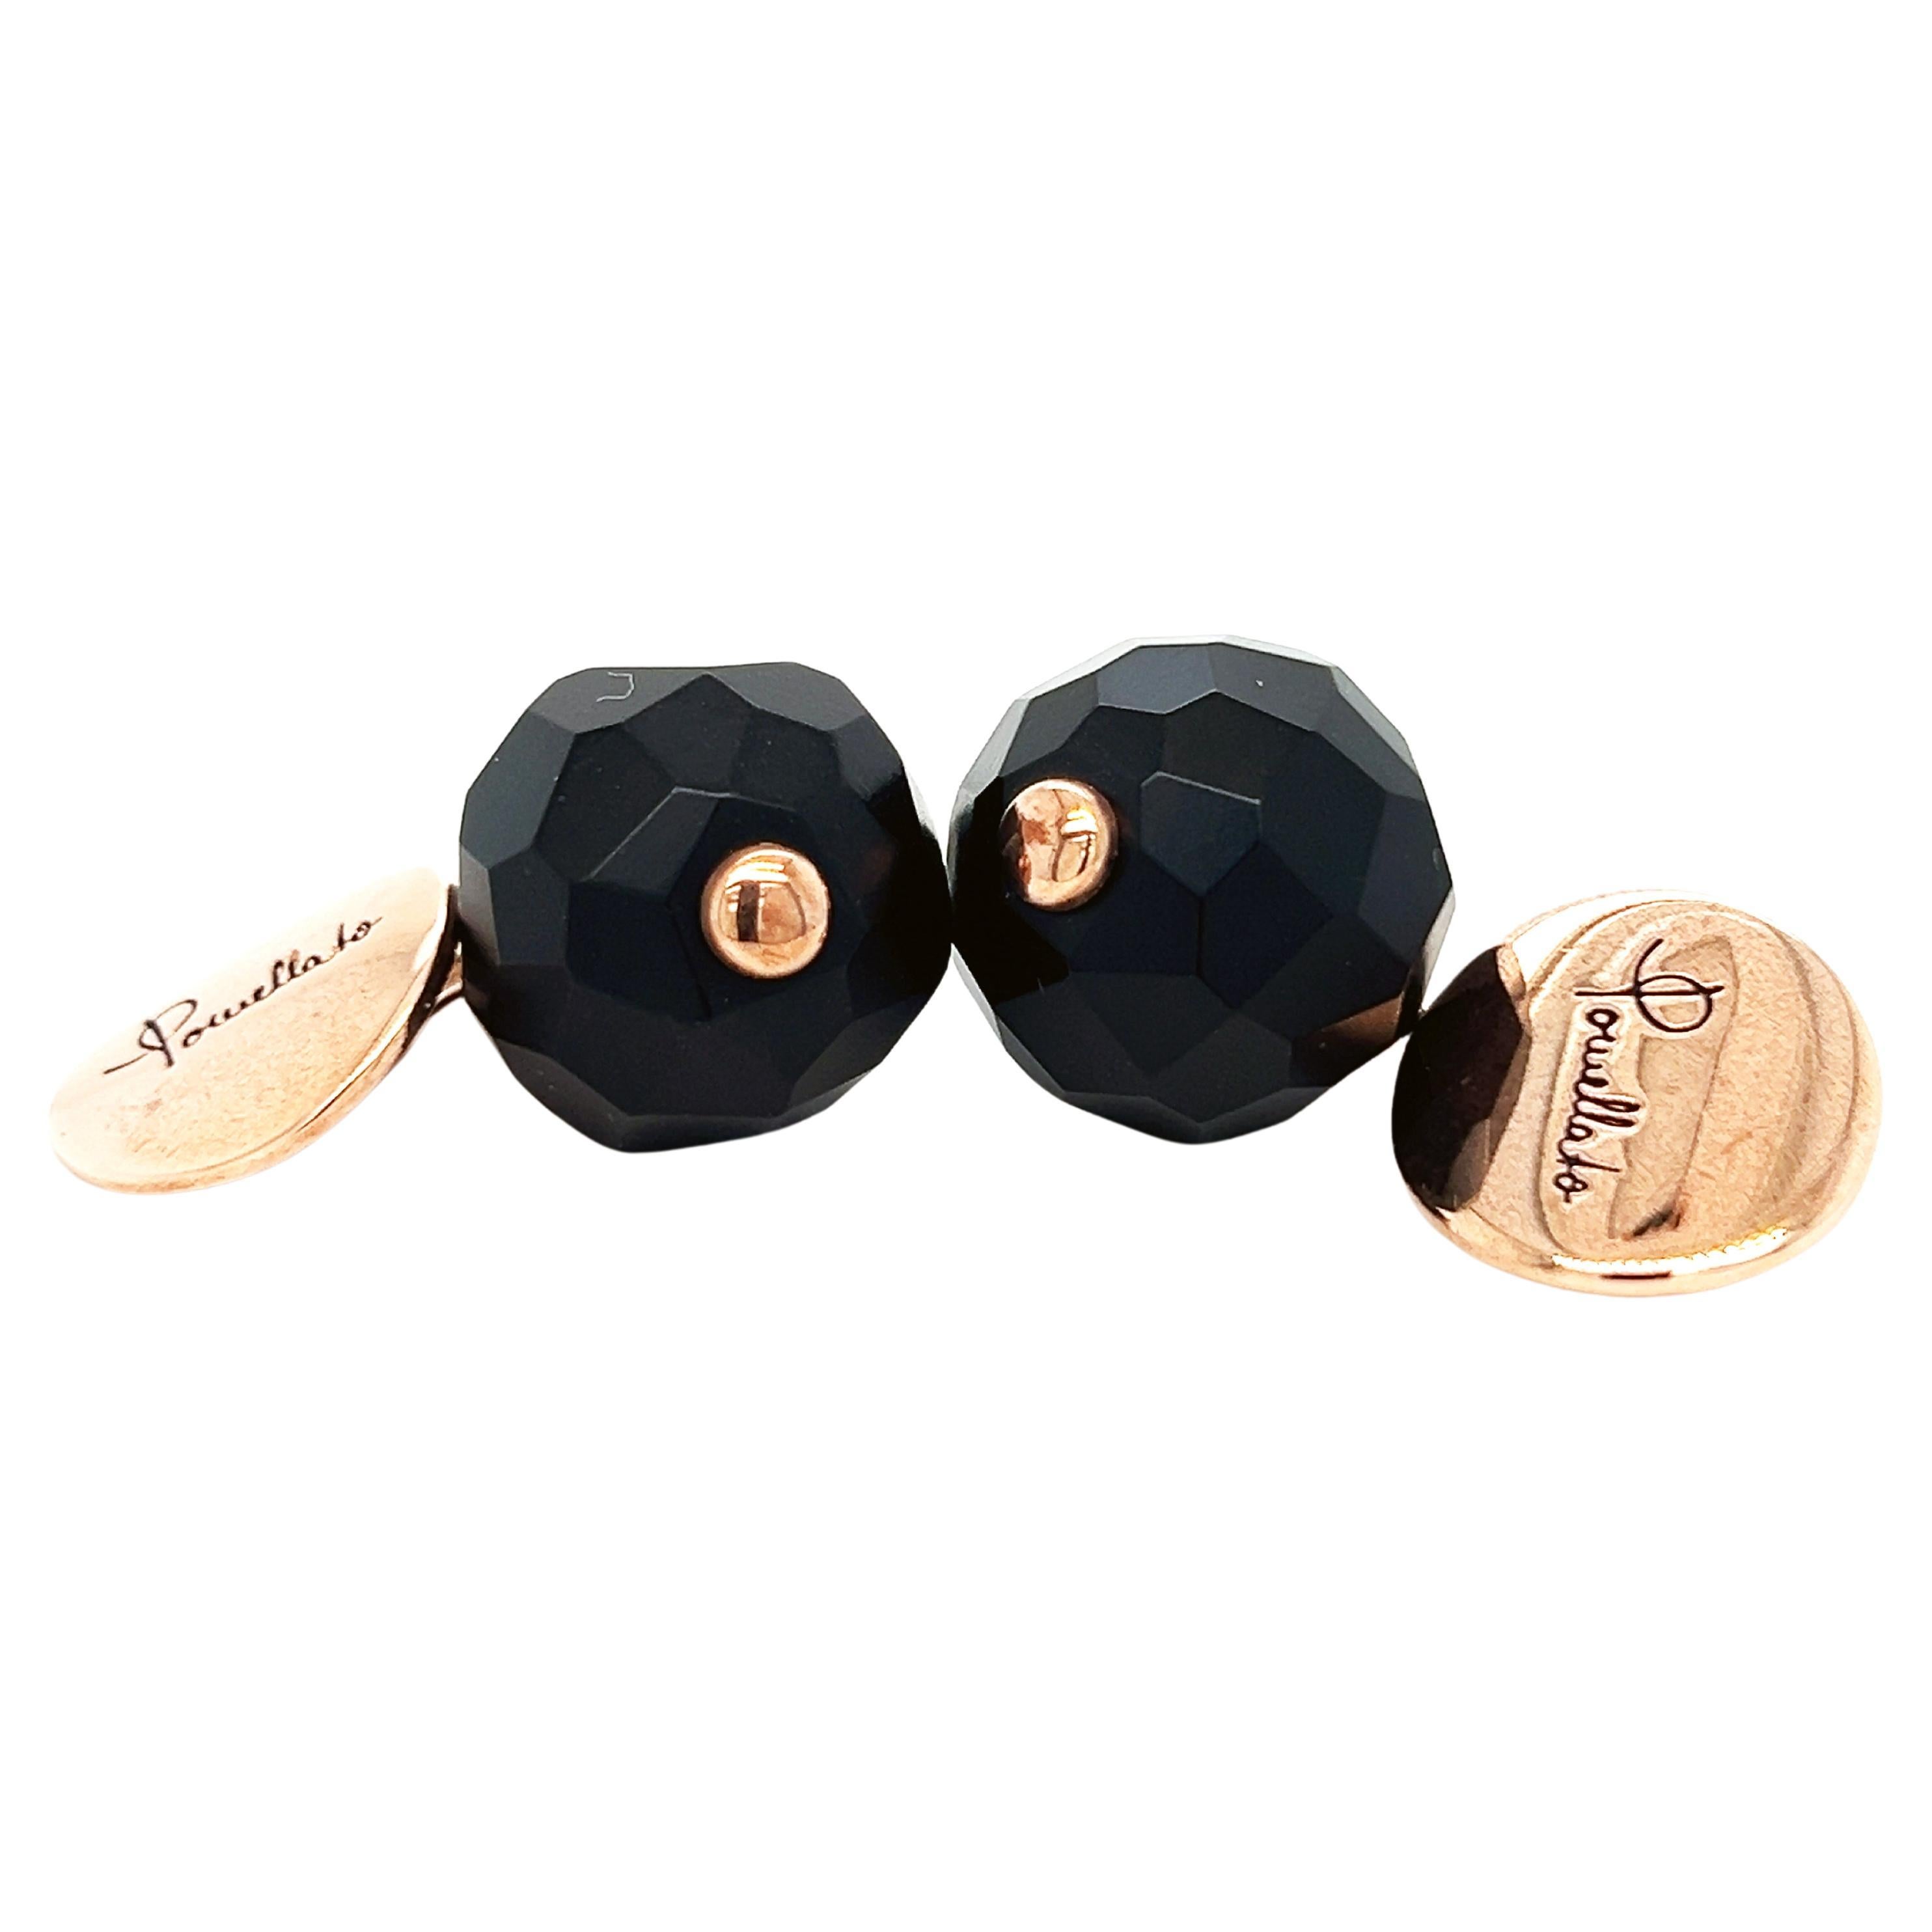 Original 2012 Iconic Pomellato Victoria Jet Faceted Ball Rose Gold Cufflinks For Sale